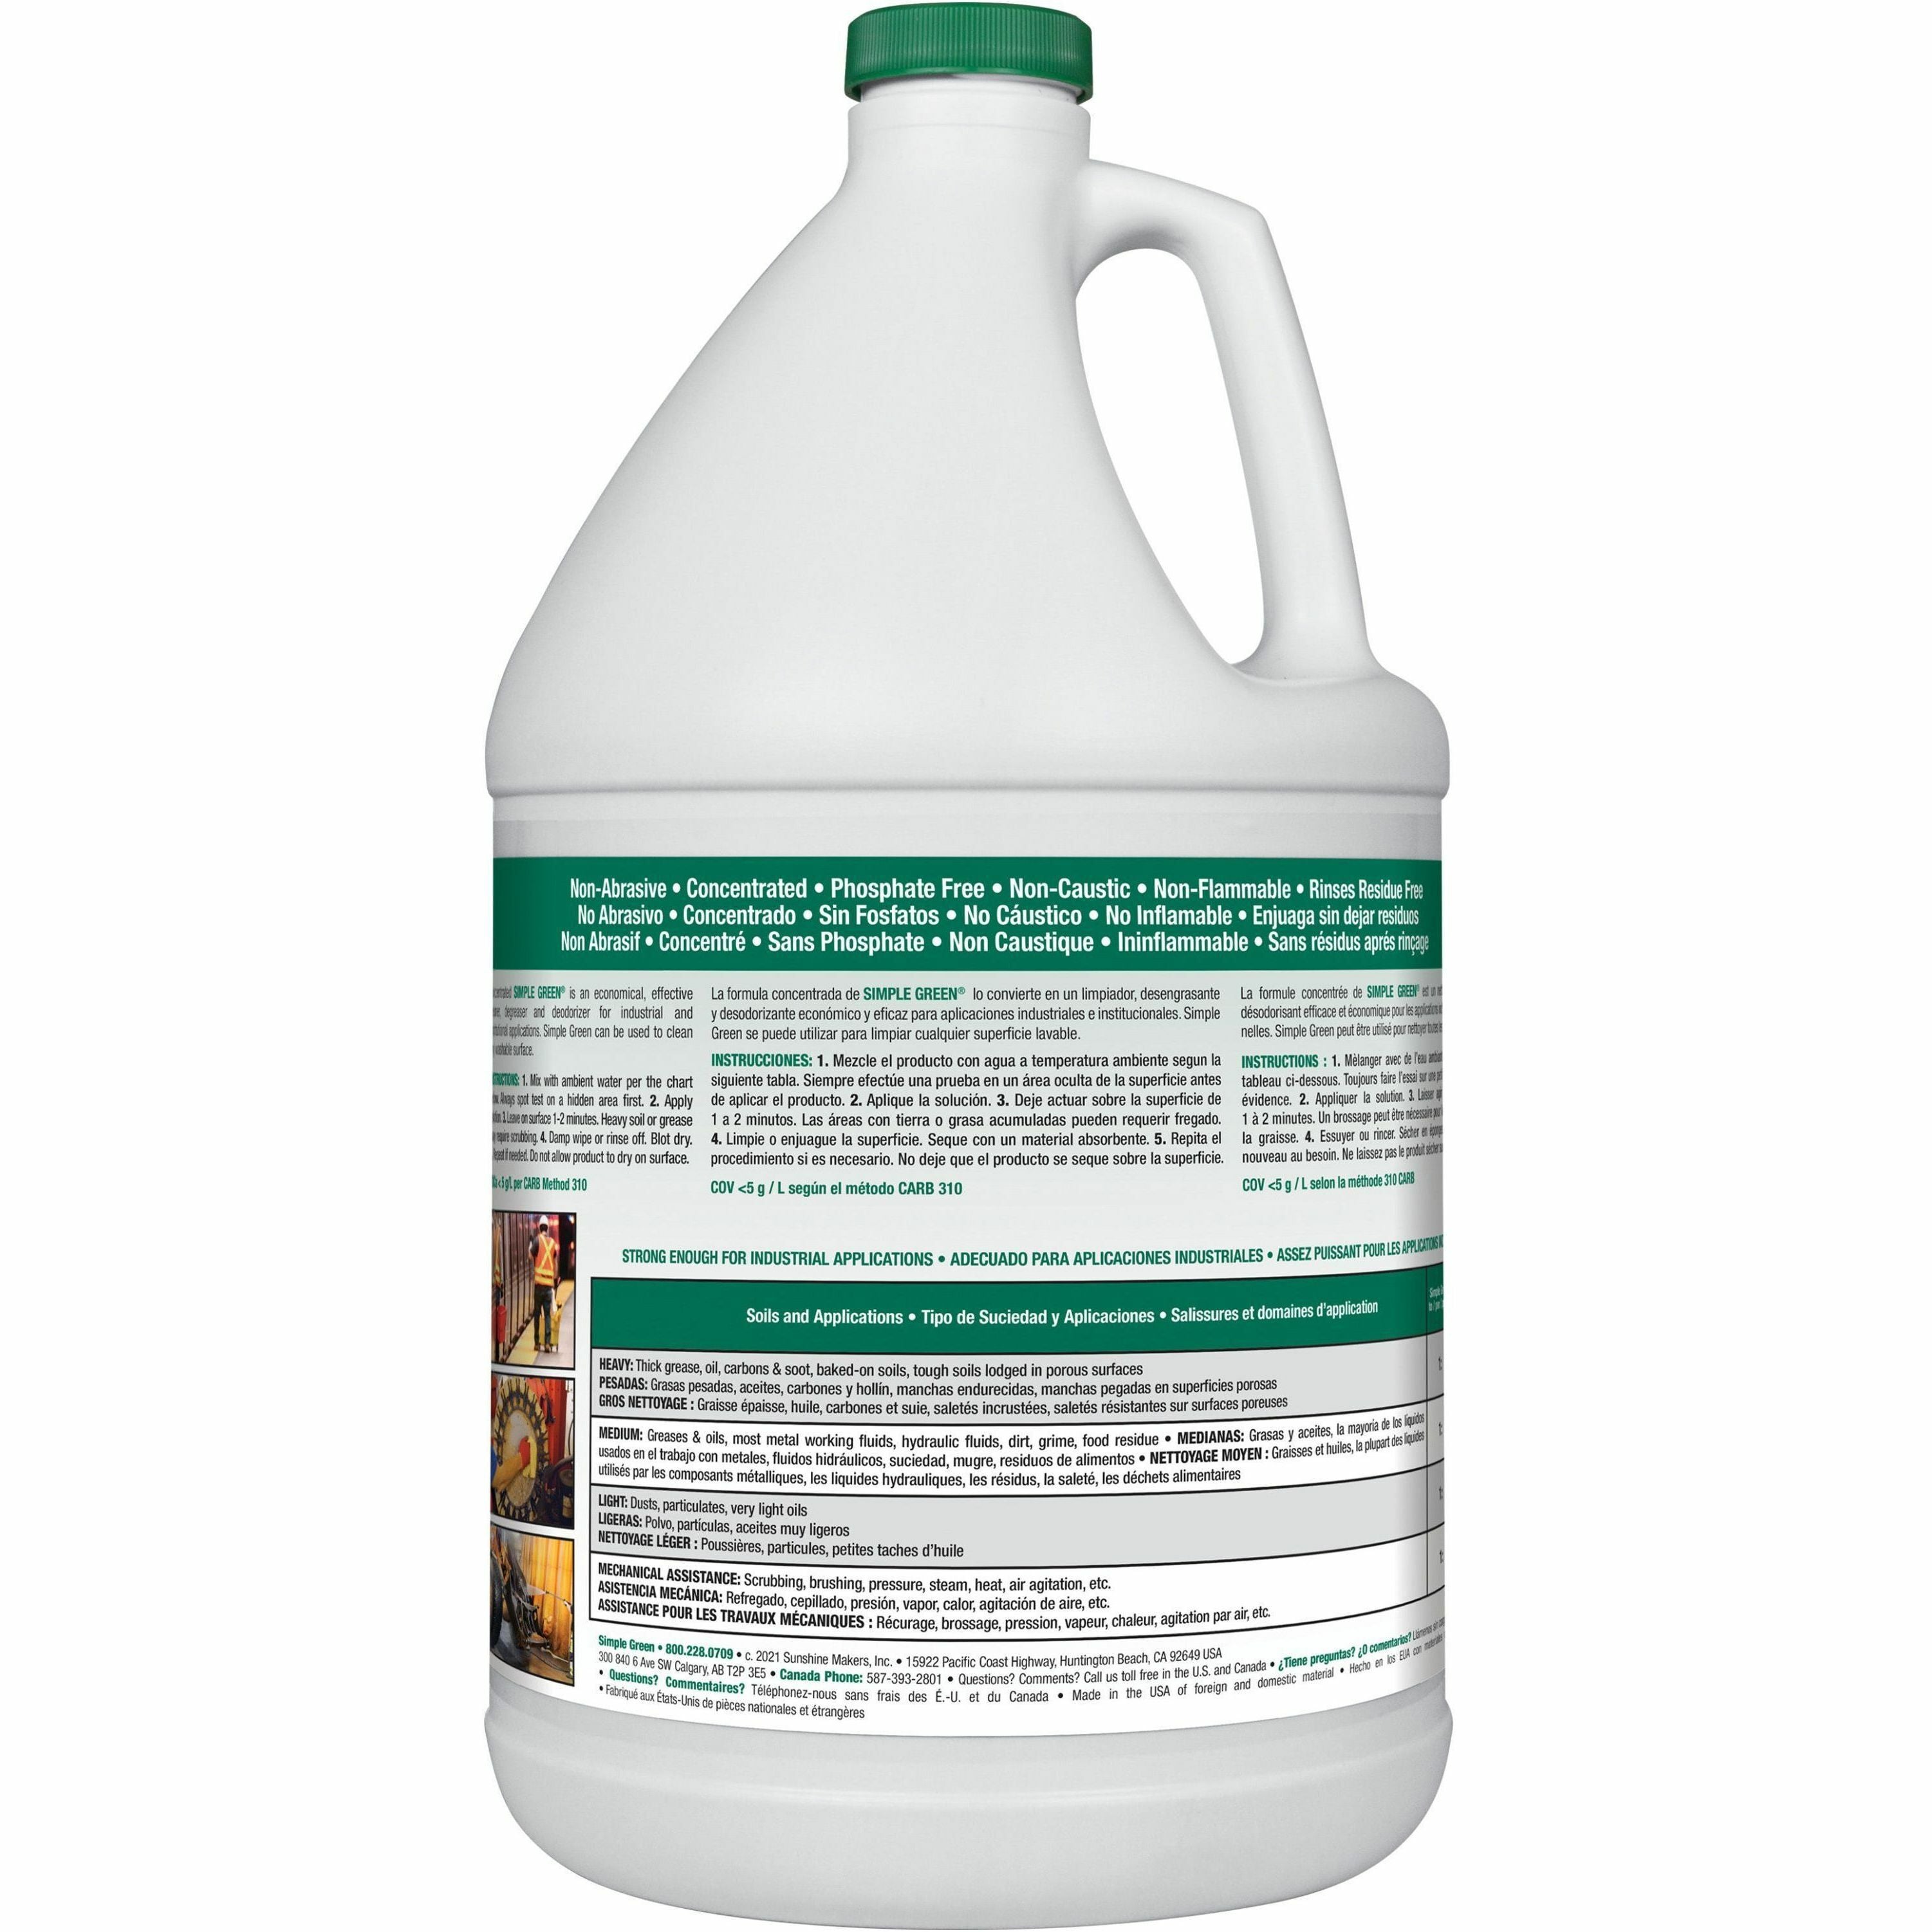 simple-green-industrial-cleaner-degreaser-concentrate-128-fl-oz-4-quart-original-scent-168-pallet-non-toxic-non-abrasive-non-corrosive-residue-free-non-flammable-white_smp13005pl - 2